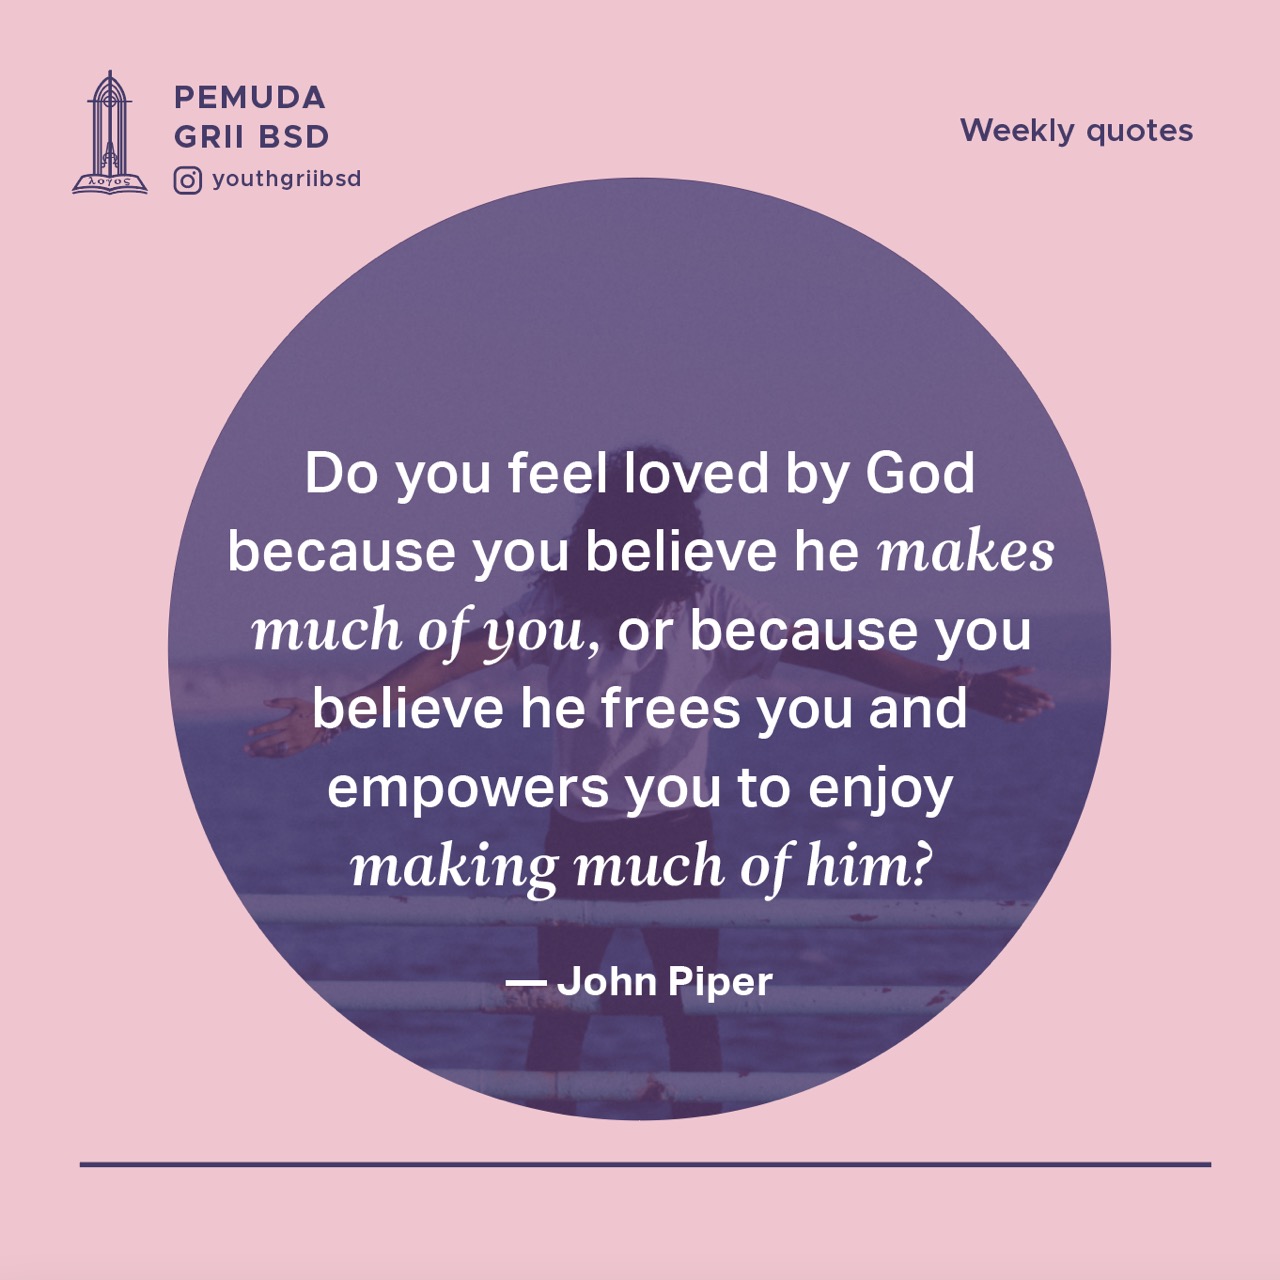 Do you feel loved by God because you believe he makes much of you, or because you believe he frees you and empowers you to enjoy making much of him?